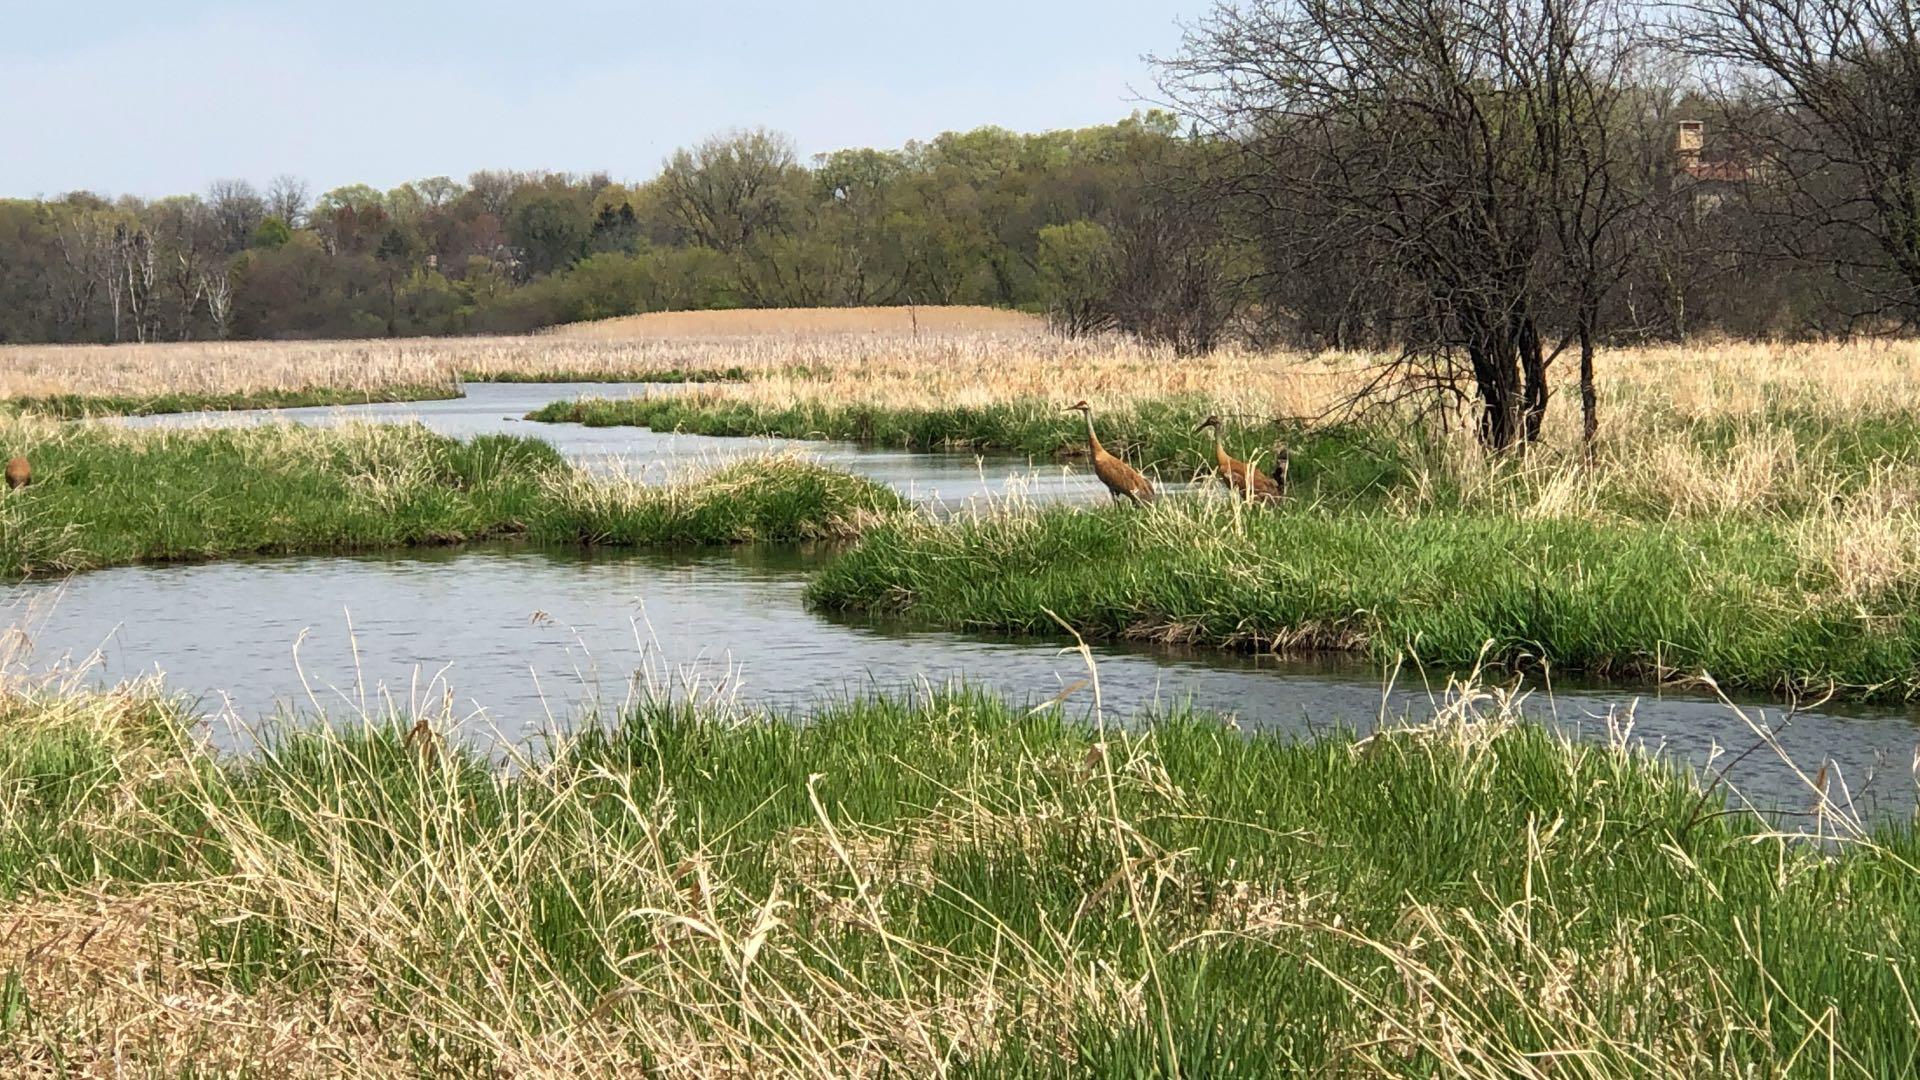 A UIC professor has received a grant from NASA to search for "legacy wetlands." (Patty Wetli / WTTW News)